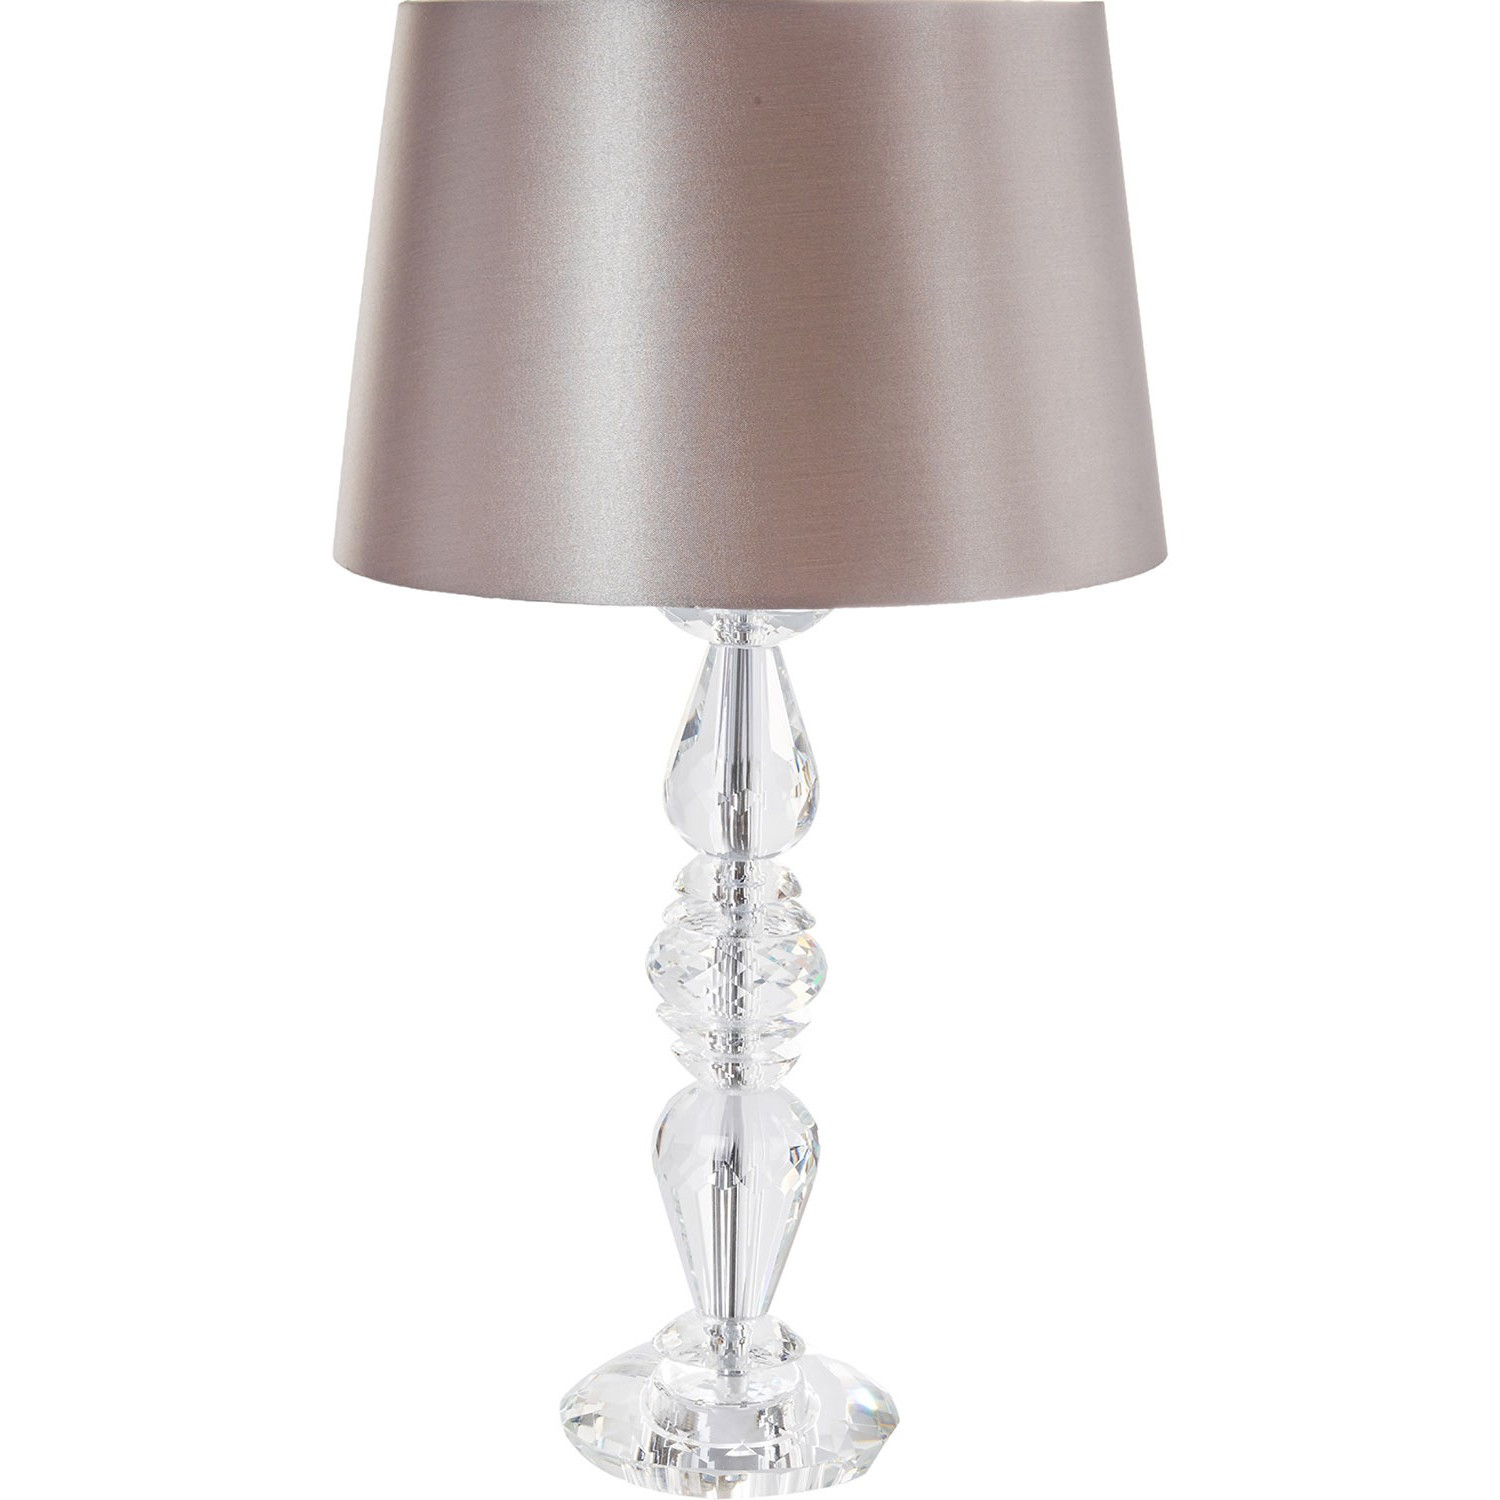 fresh design big lots table lamps contemporary brilliant simple decoration silver for bedroom inspirational floor unique aureli amp clear accent nautical baby lamp grill chef